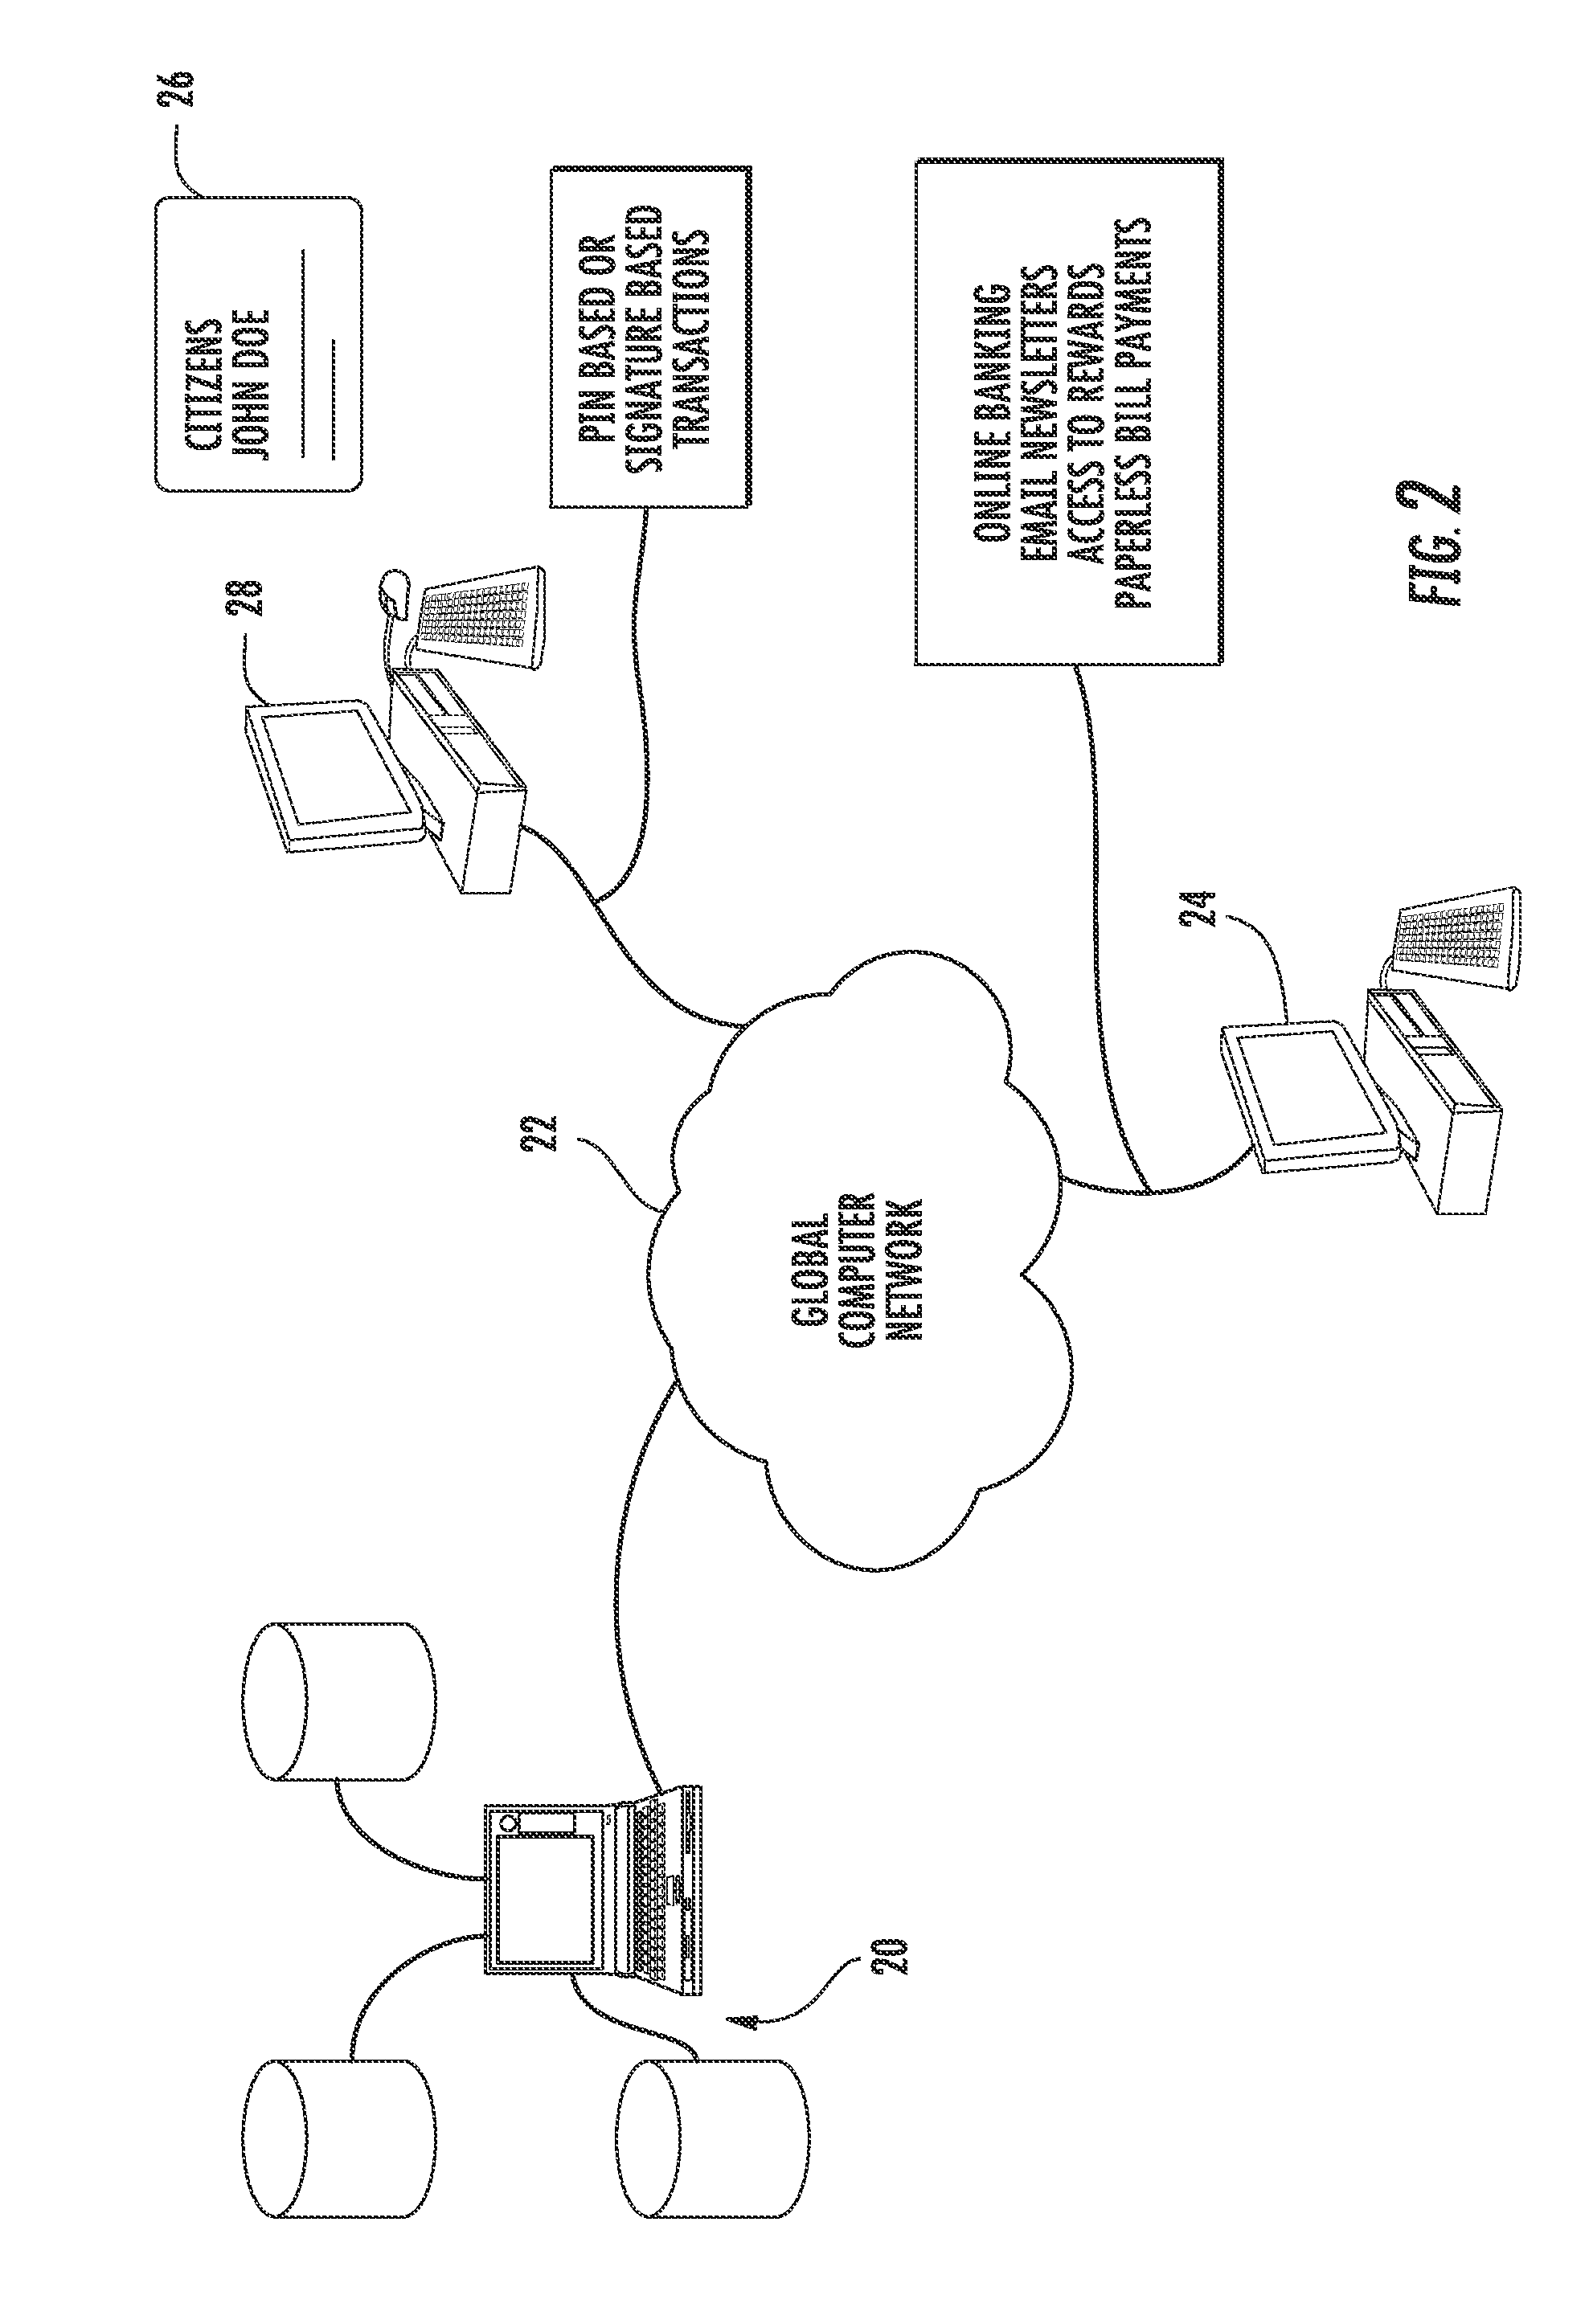 Method and system of offering an environmentally sensitive bank account